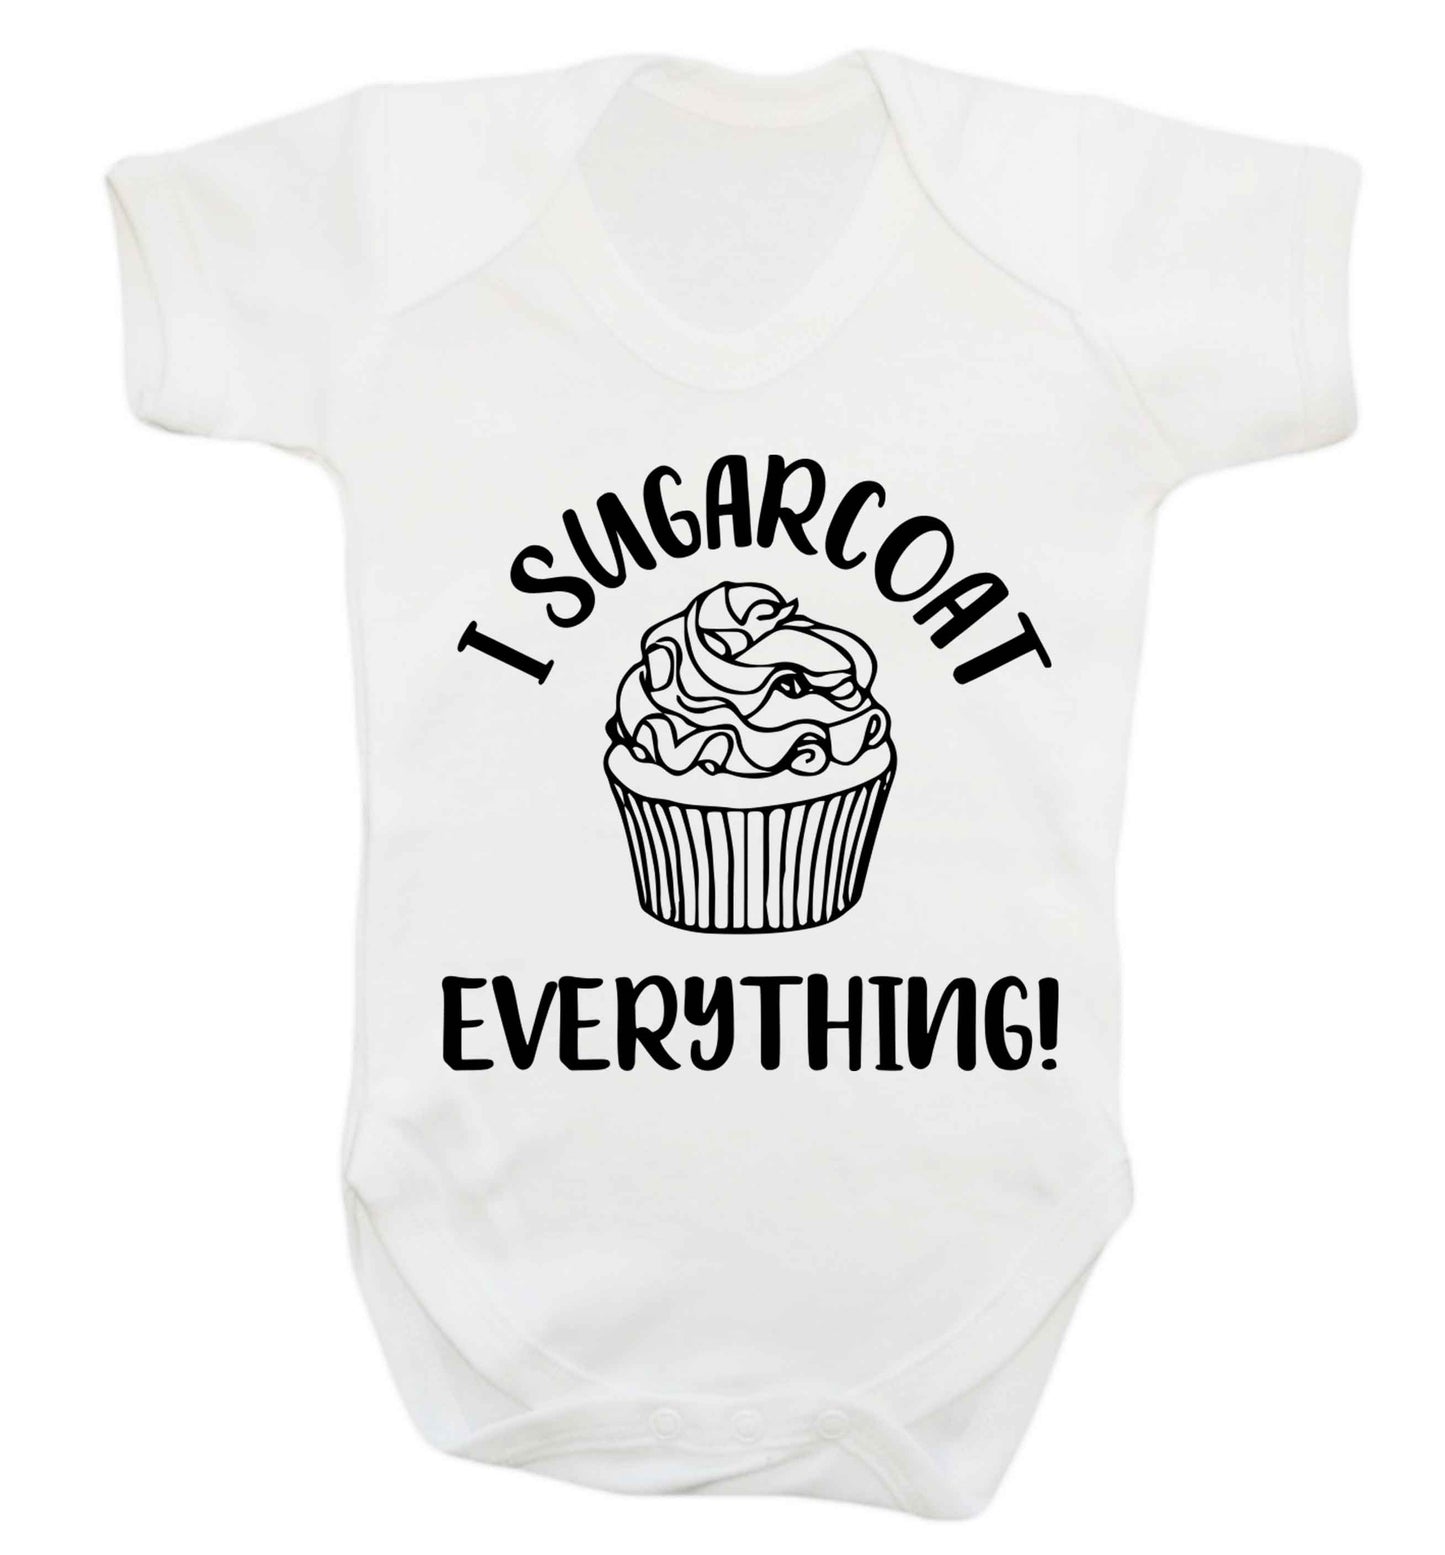 I sugarcoat everything Baby Vest white 18-24 months